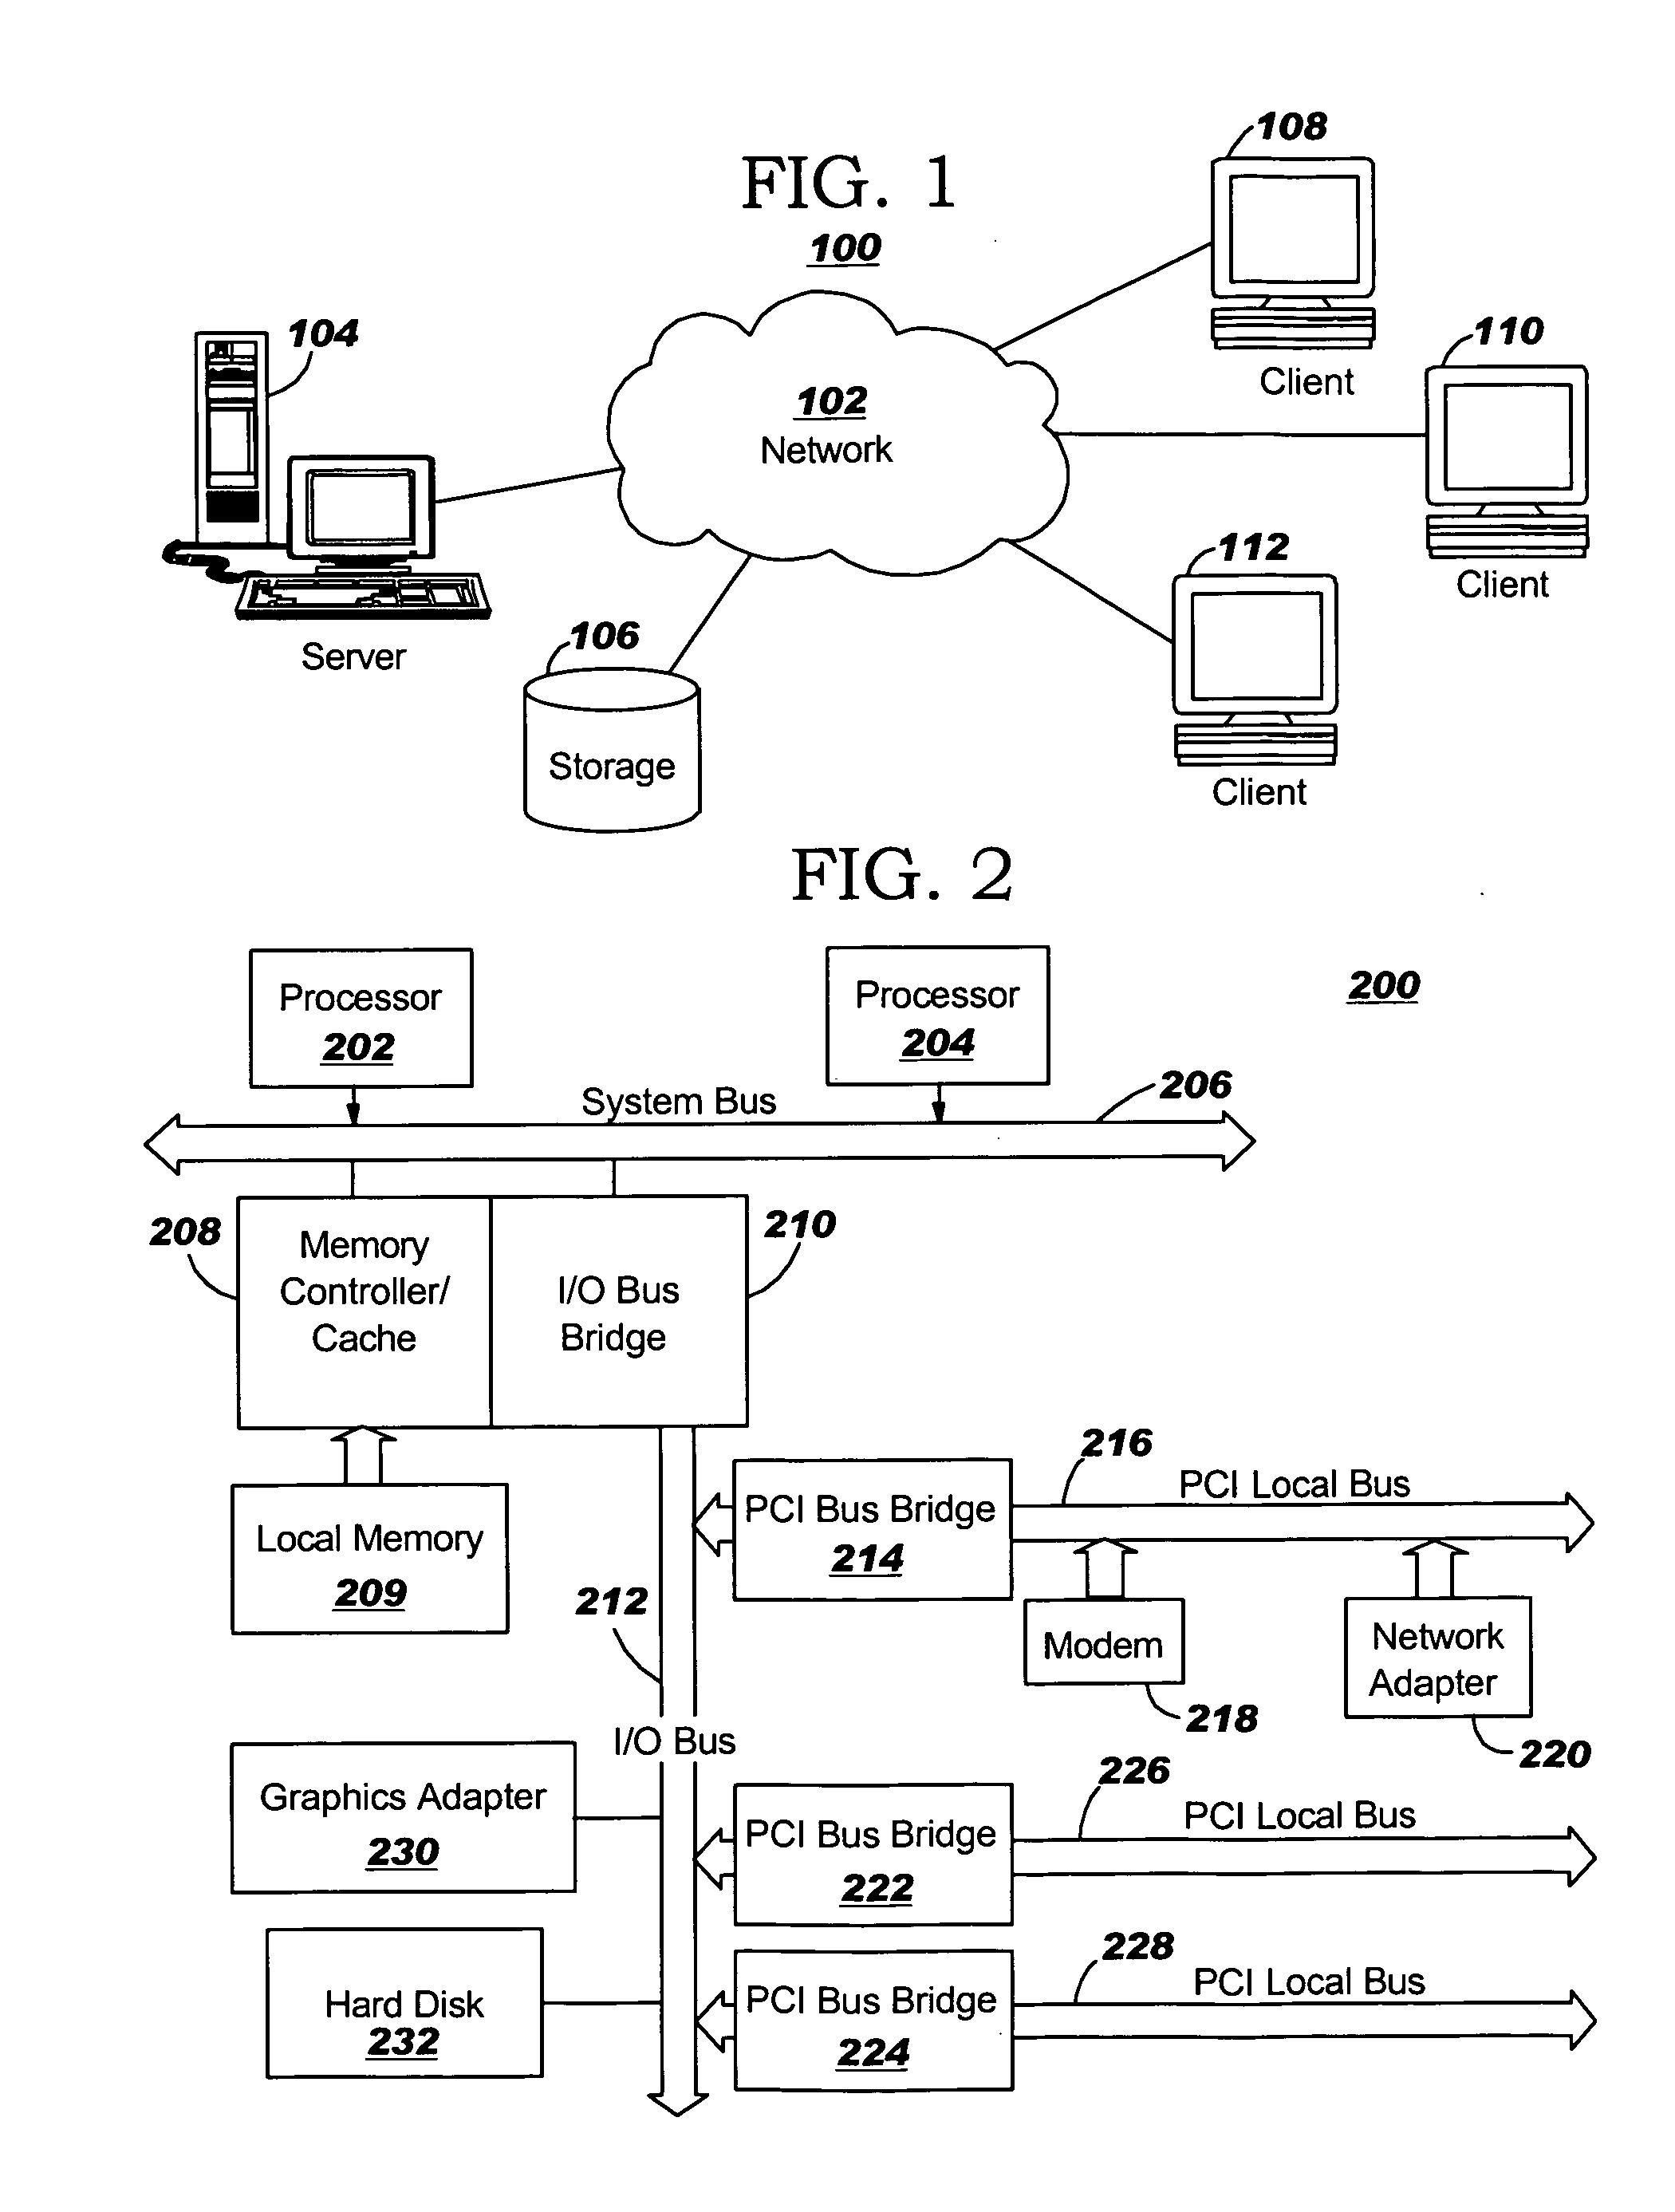 Method and computer program product for dynamic weighting of an ontological data model